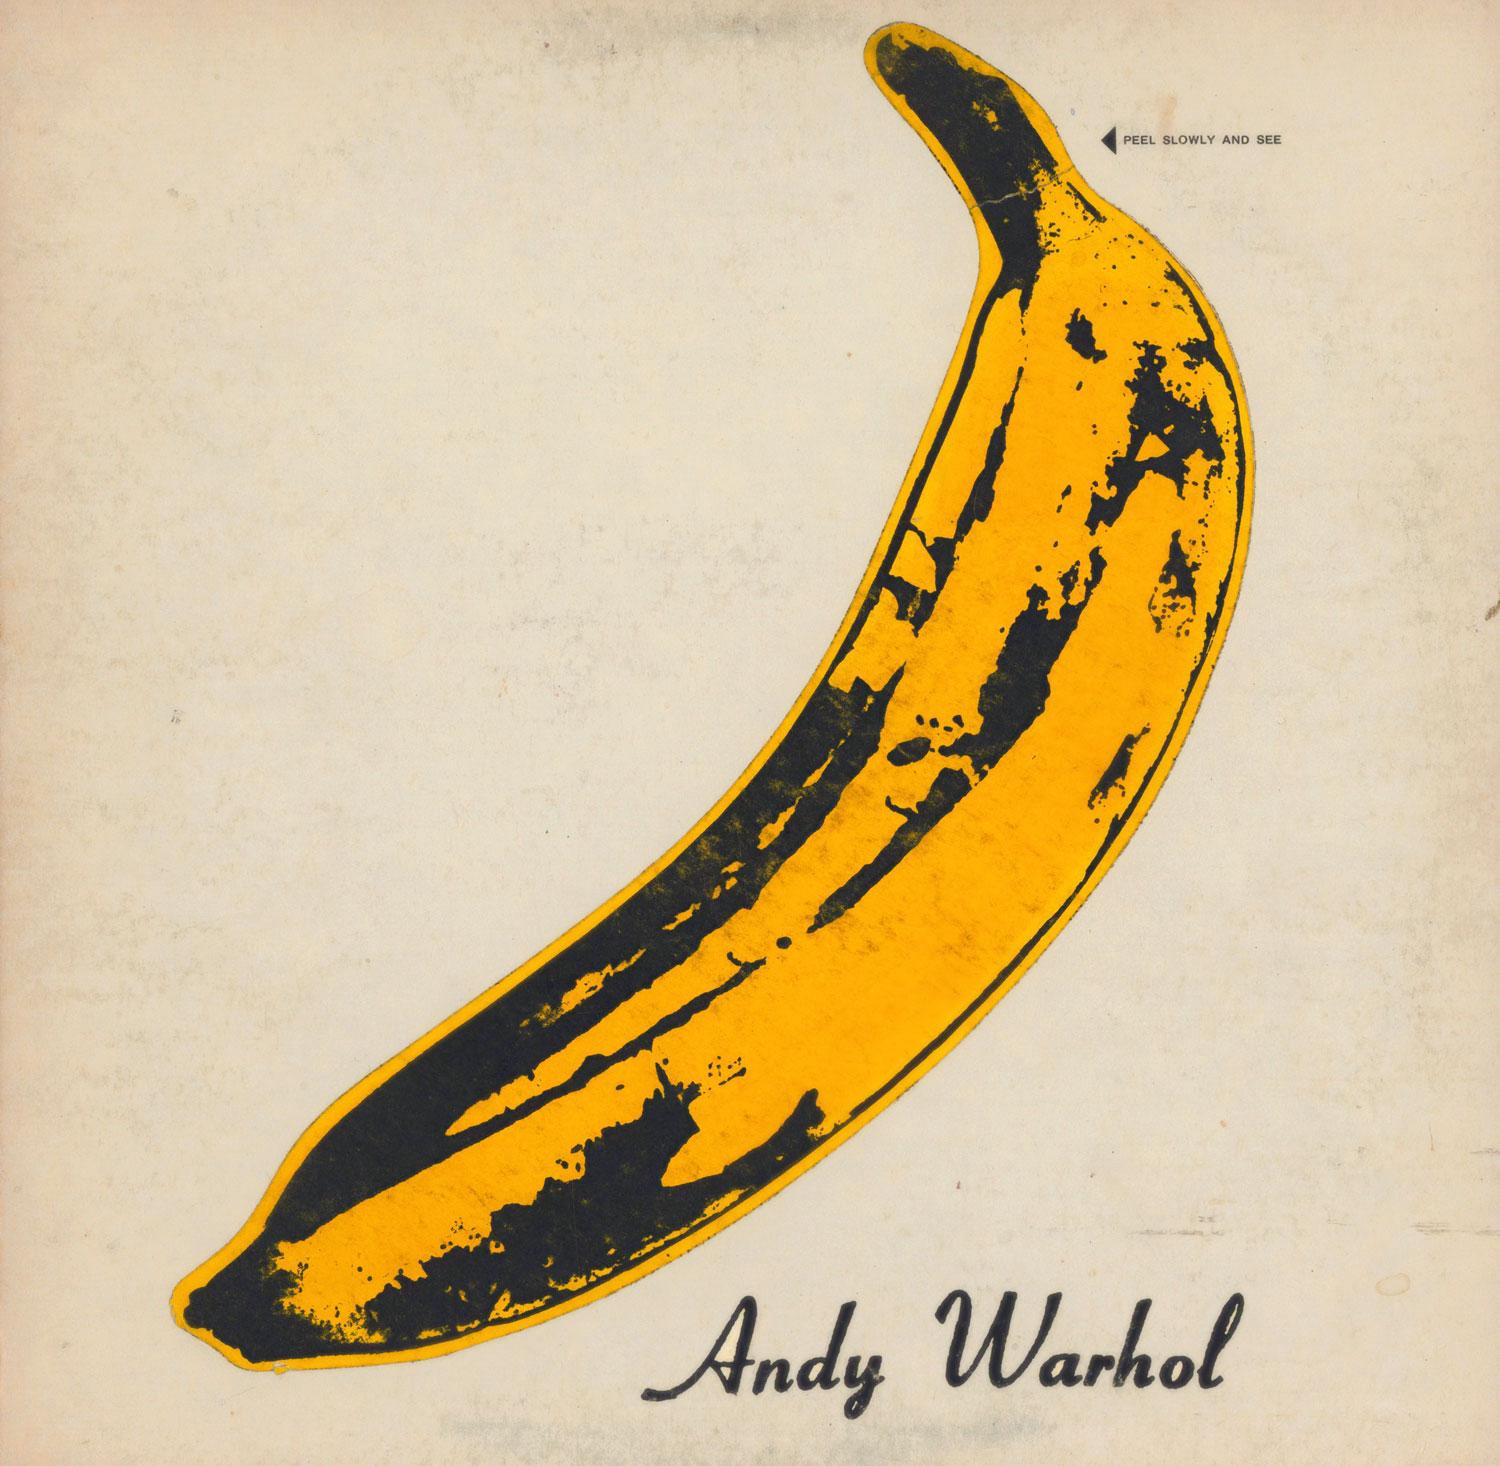 Andy Warhol Banana Cover Art 1967:
The Velvet Underground & Nico: the ultra rare, highly sought-after, early 1967 East Coast pressing uniquely featuring a fully unpeeled banana. Accompanied by its original record. A holy-grail Warhol collectible